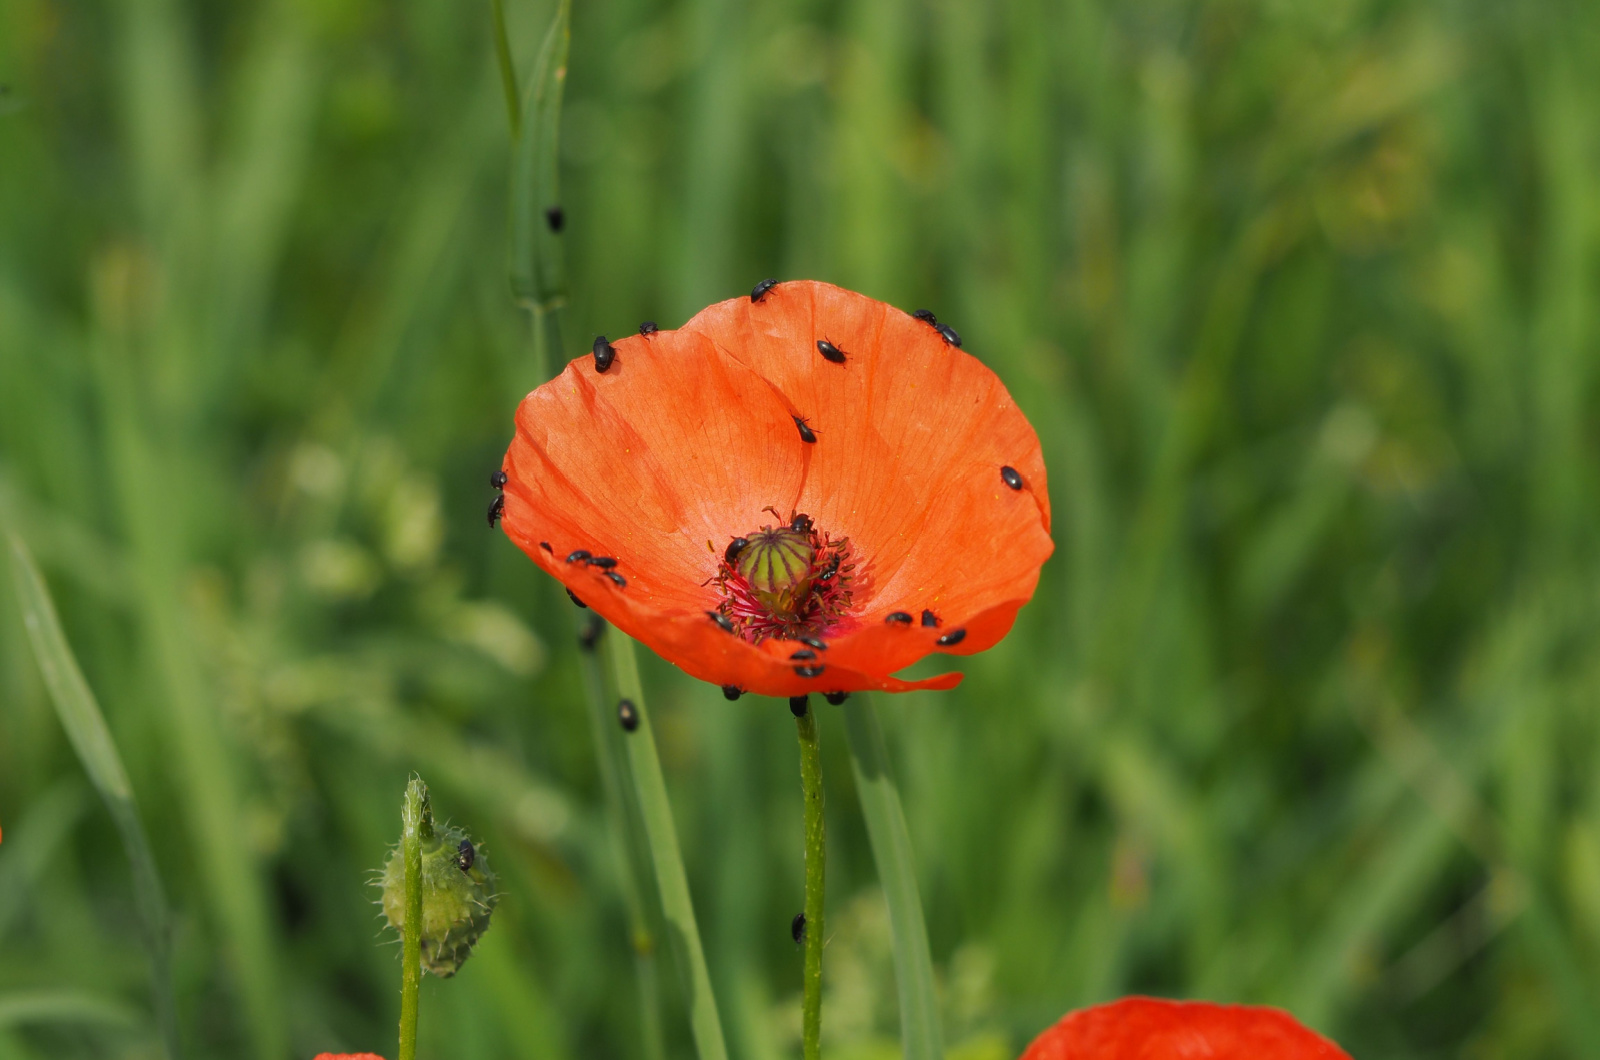 Red poppy attacked by aphids